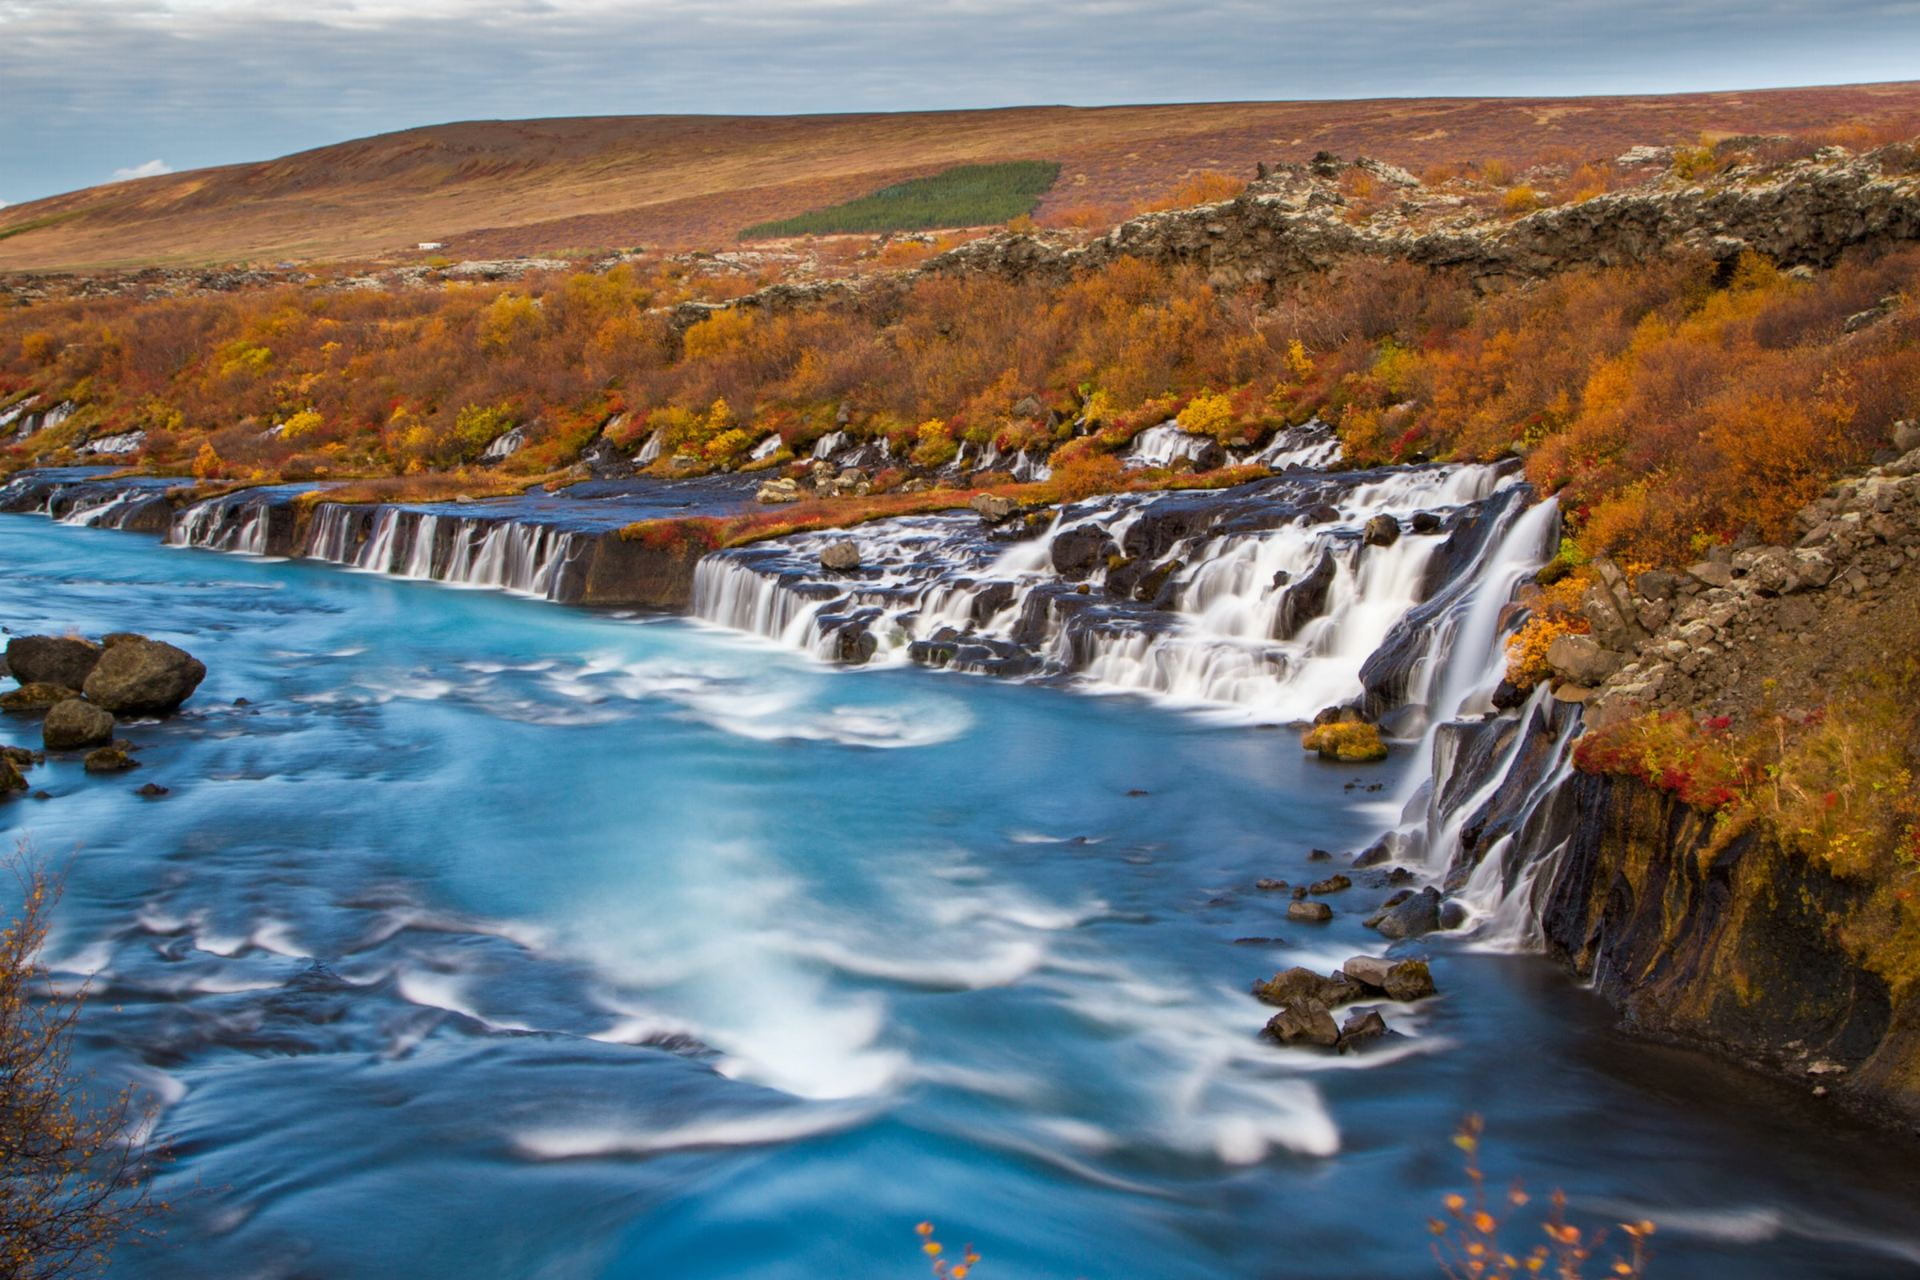 Groundwater seeps in Iceland